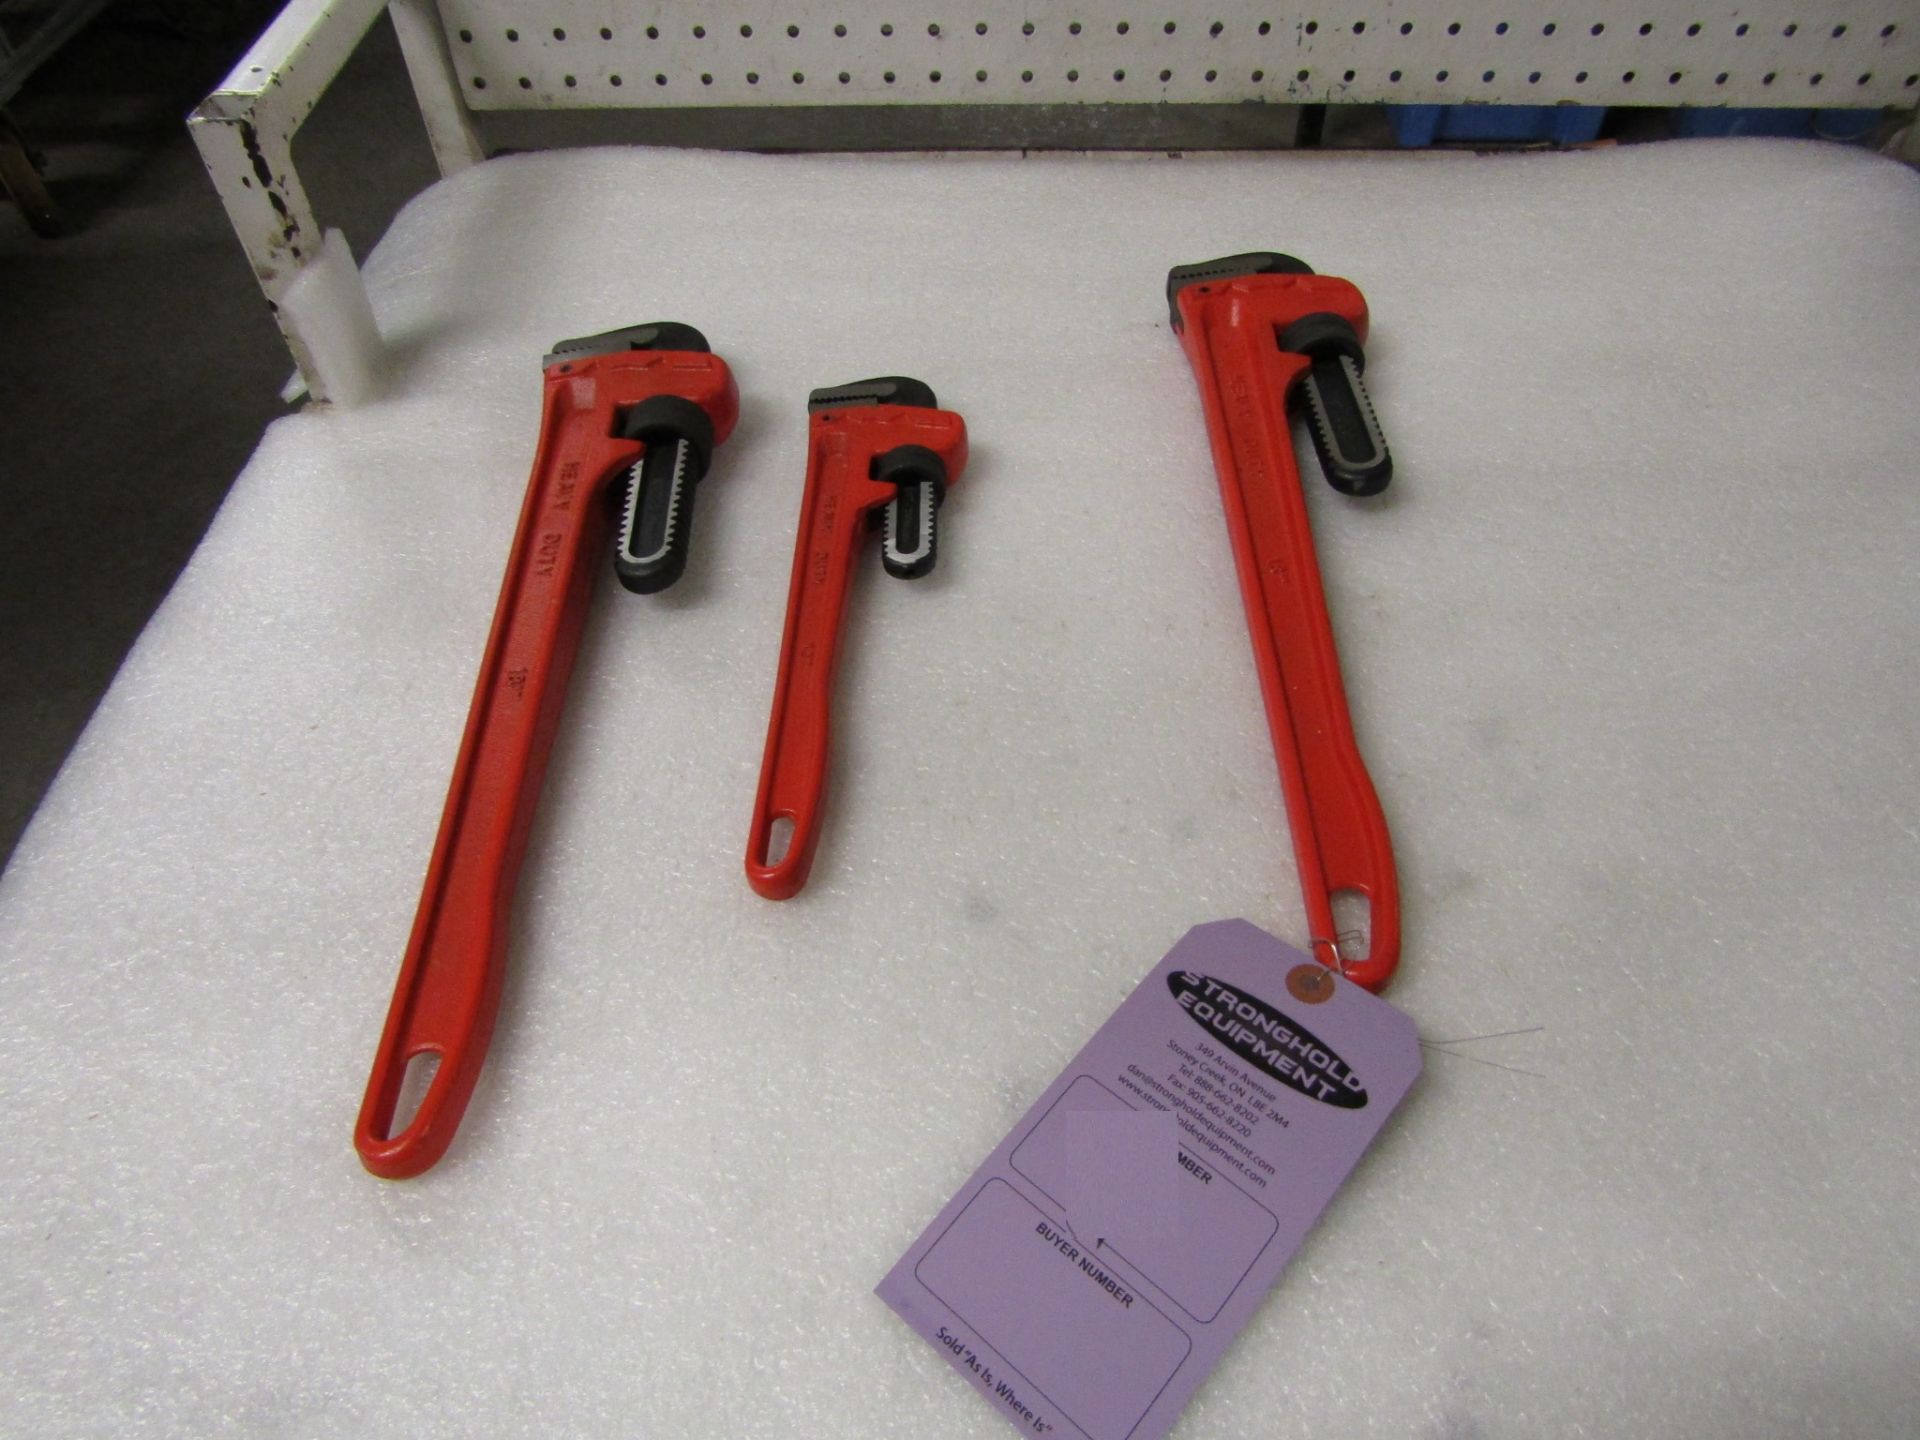 Lot of 3 Pipe Wrenches - brand new